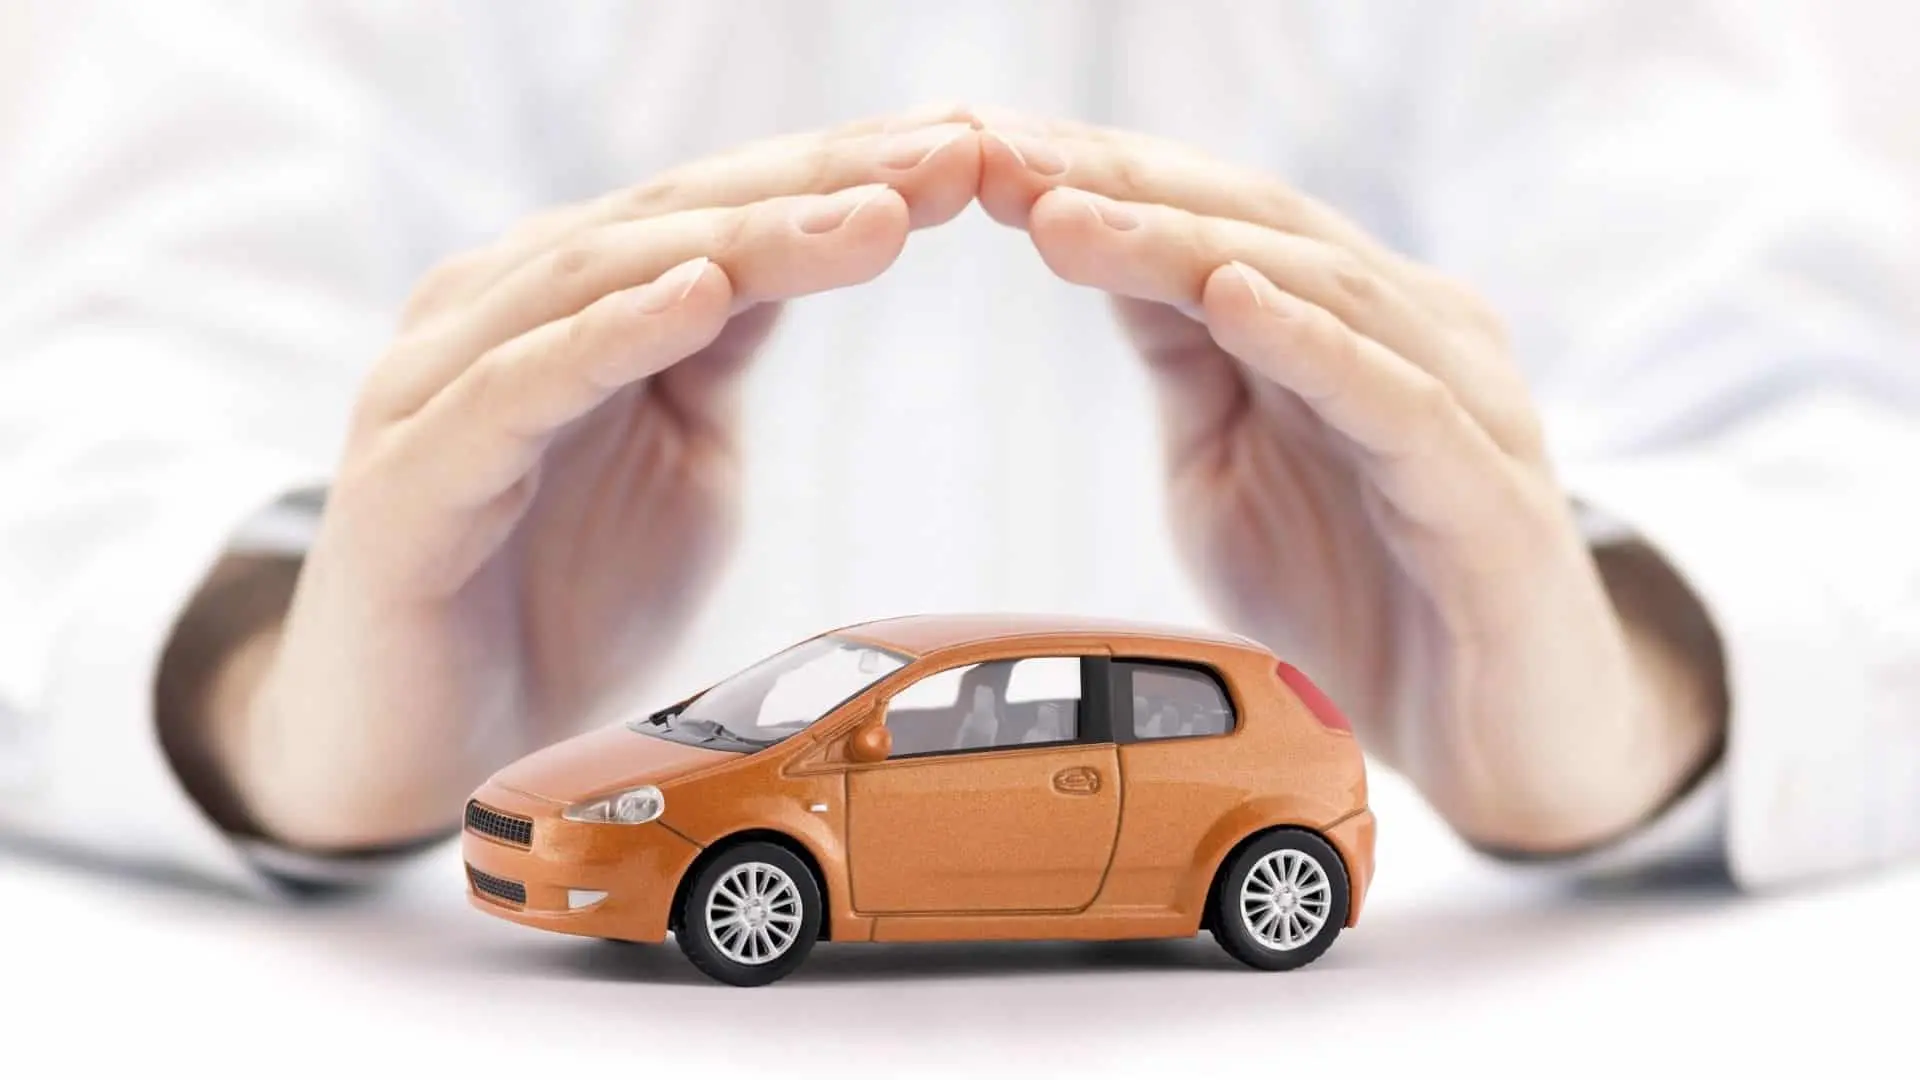 Budget Car Insurance: How to Save Money on Your Auto Insurance